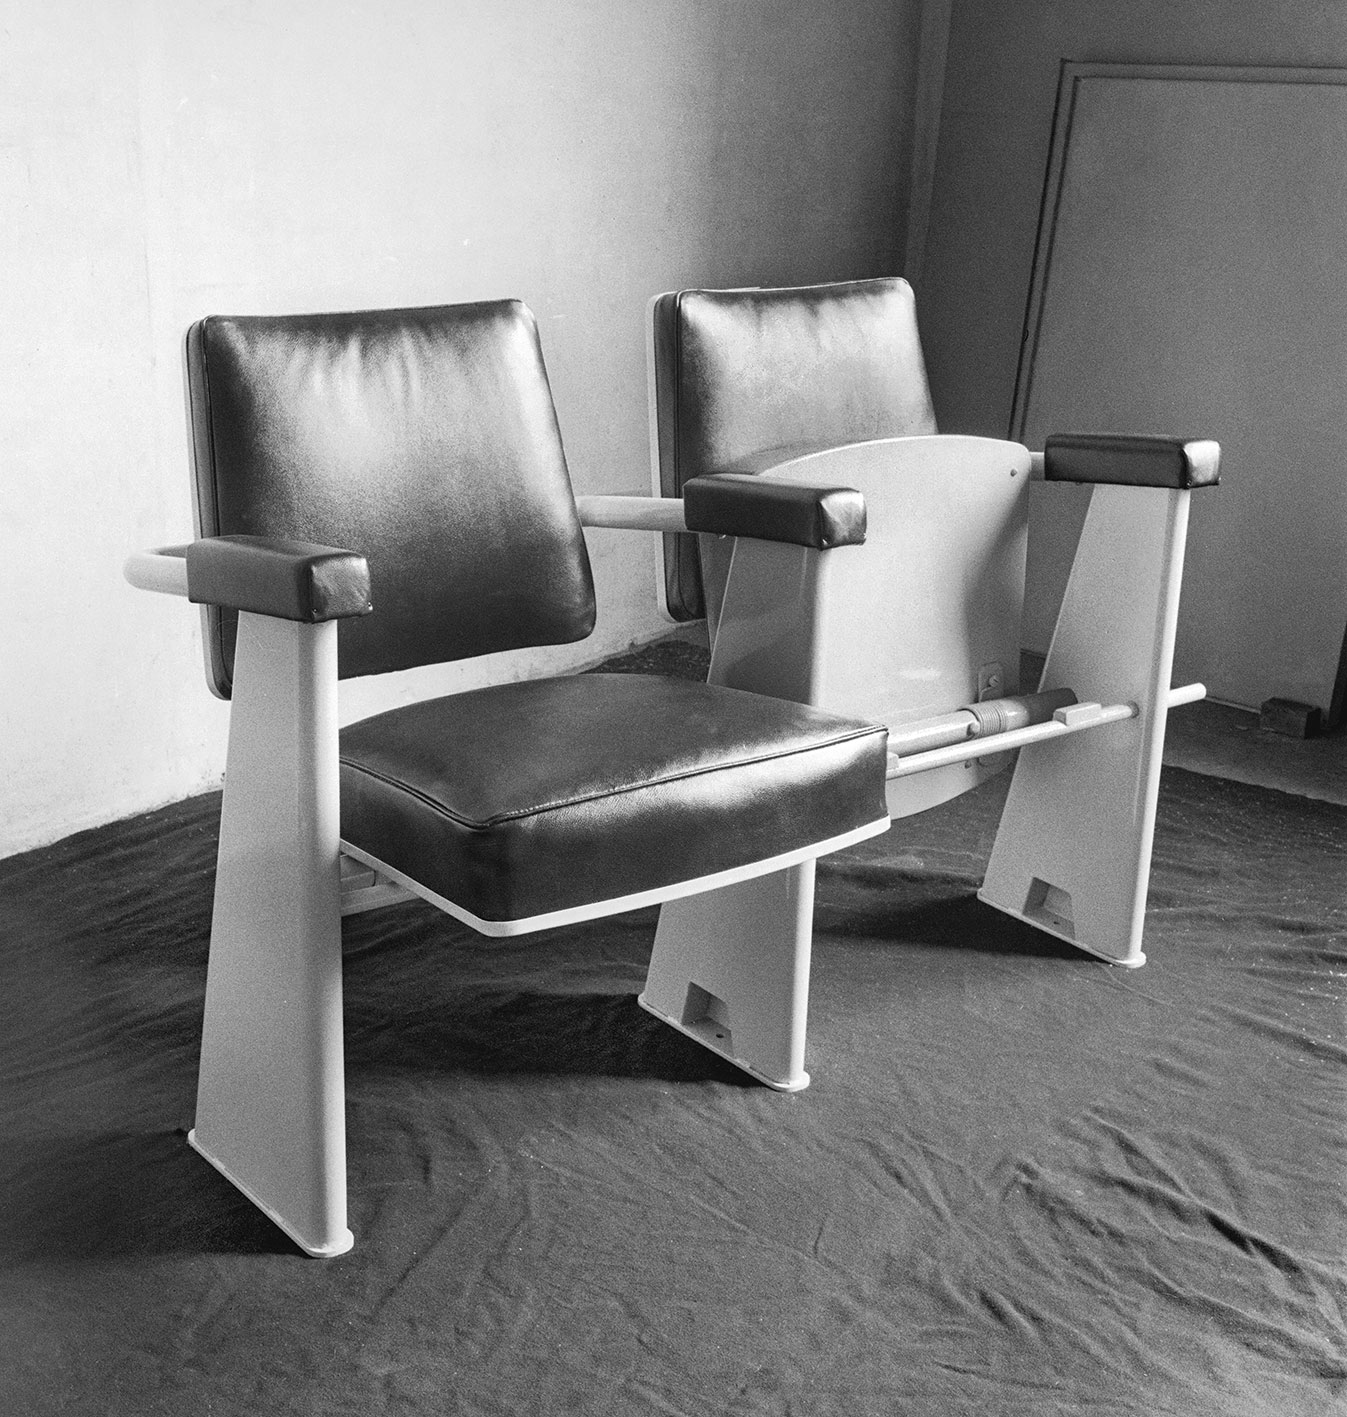 Juxtaposable lecture hall chairs with lift-up seats. Prototype in the workshop, ca. 1952.